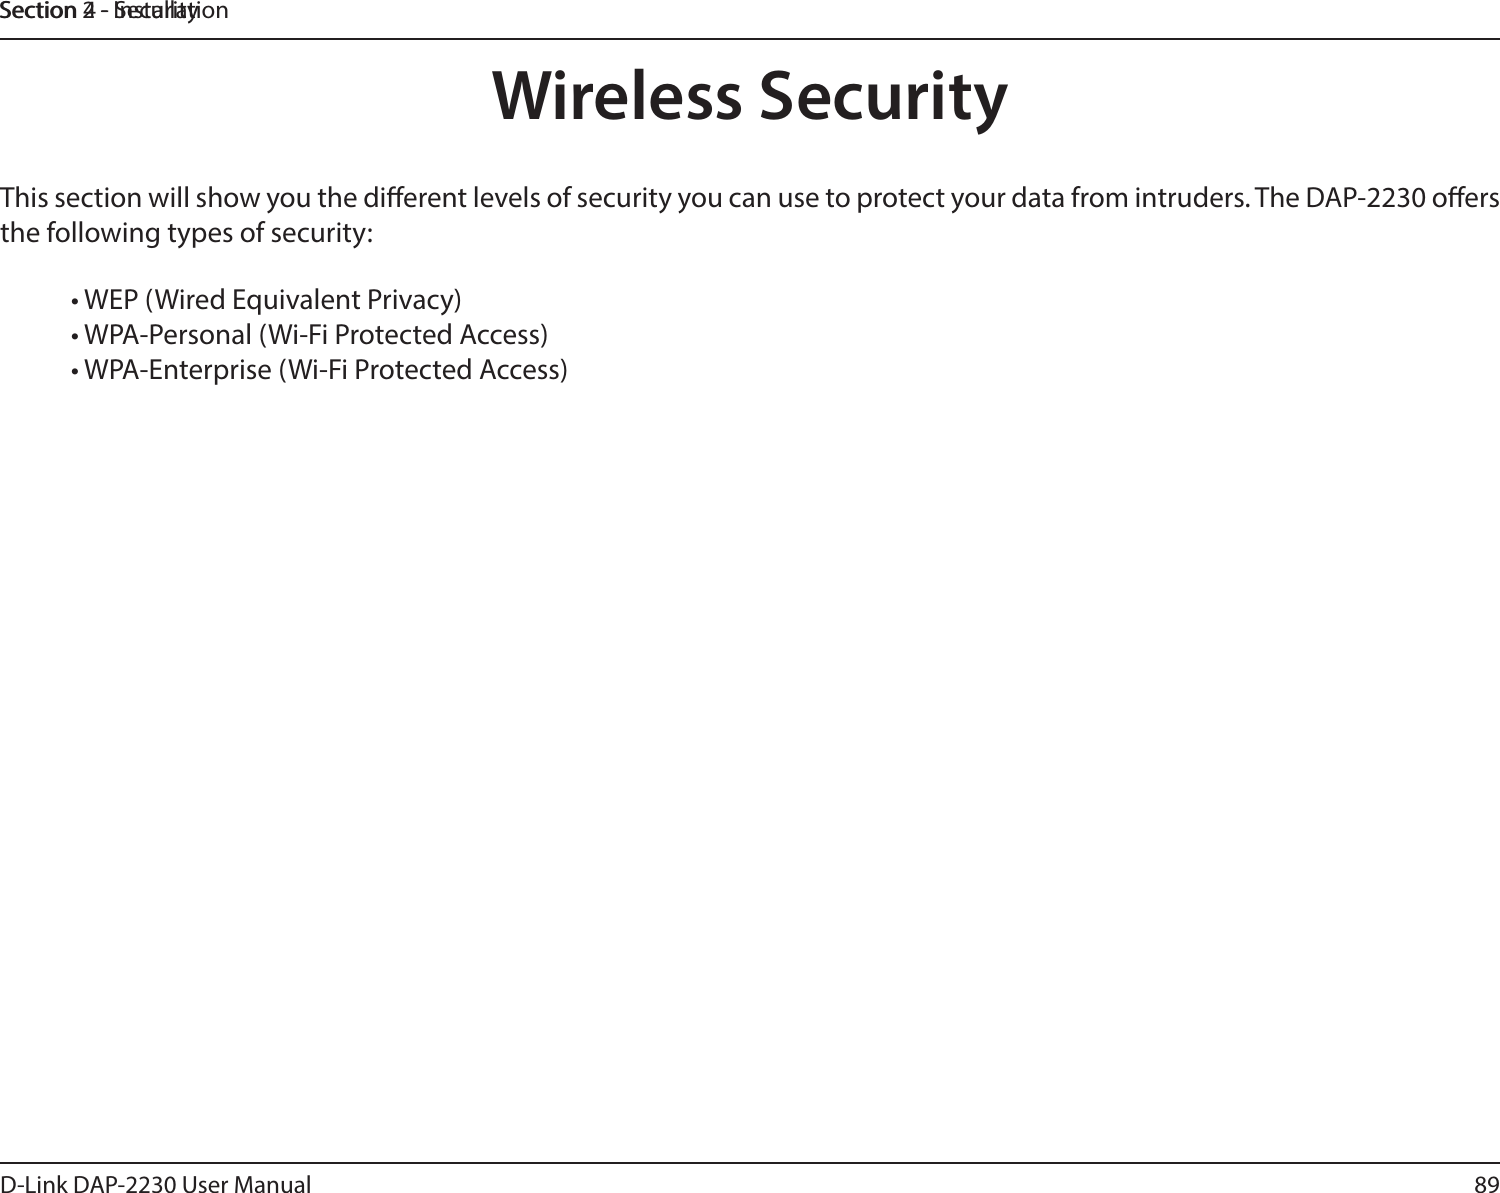 89D-Link DAP-2230 User ManualSection 2 - InstallationSection 4 - SecurityWireless SecurityThis section will show you the dierent levels of security you can use to protect your data from intruders. The DAP-2230 oers the following types of security:• WEP (Wired Equivalent Privacy) • WPA-Personal (Wi-Fi Protected Access) • WPA-Enterprise (Wi-Fi Protected Access) 